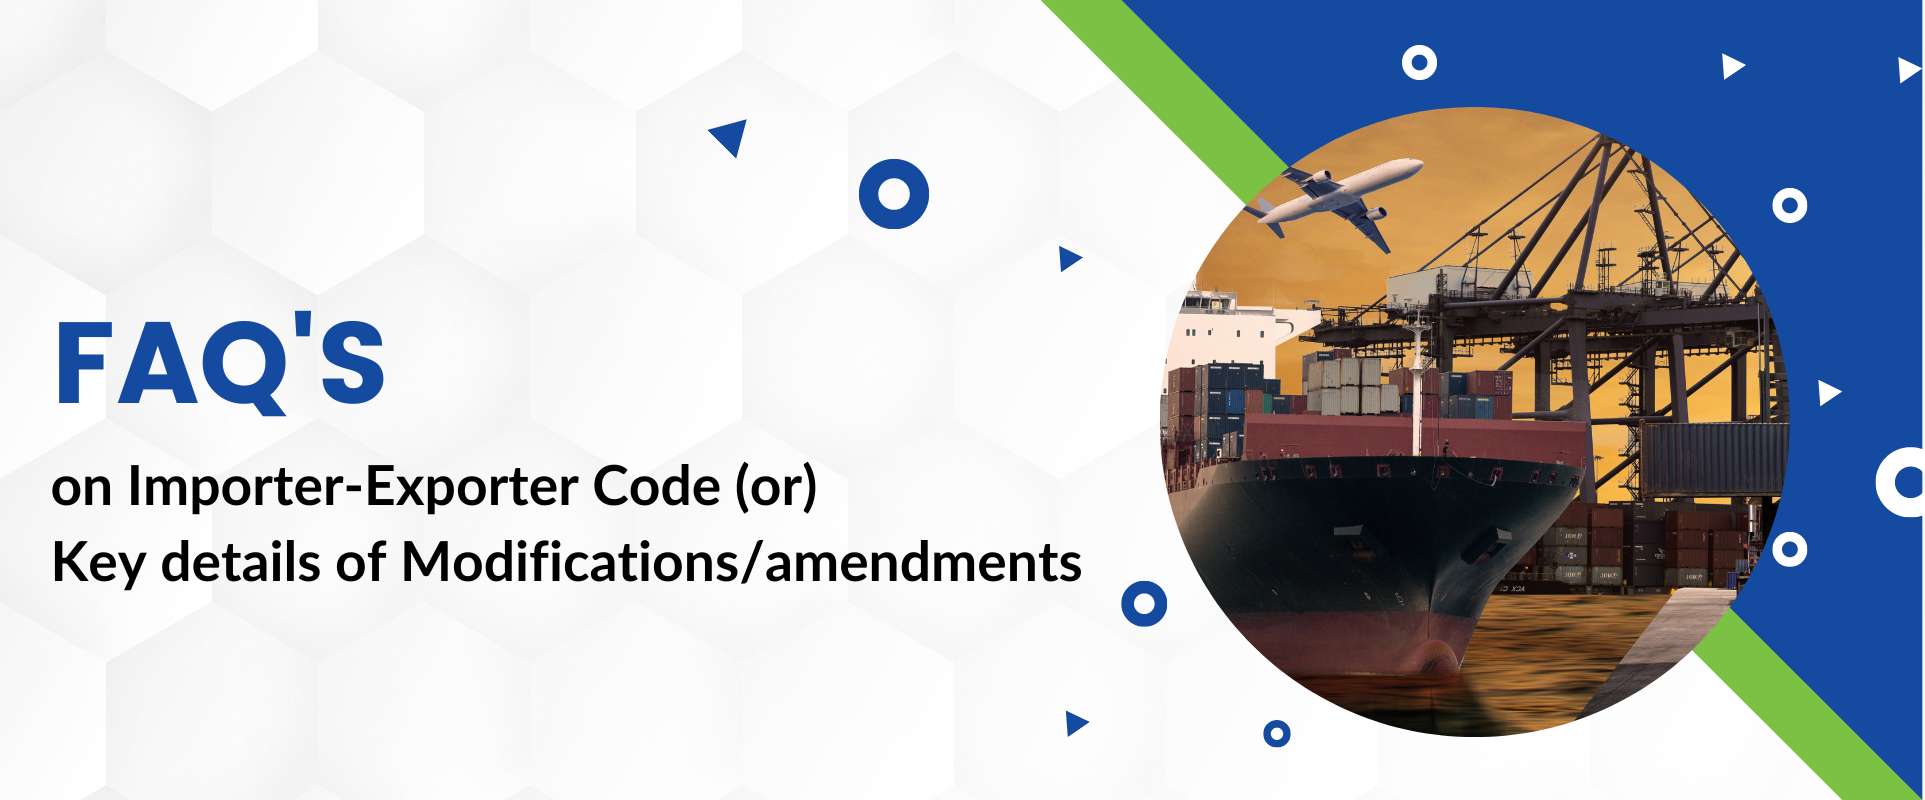 Frequently Asked Questions on Importer-Exporter Code or Key details of Modifications/amendments